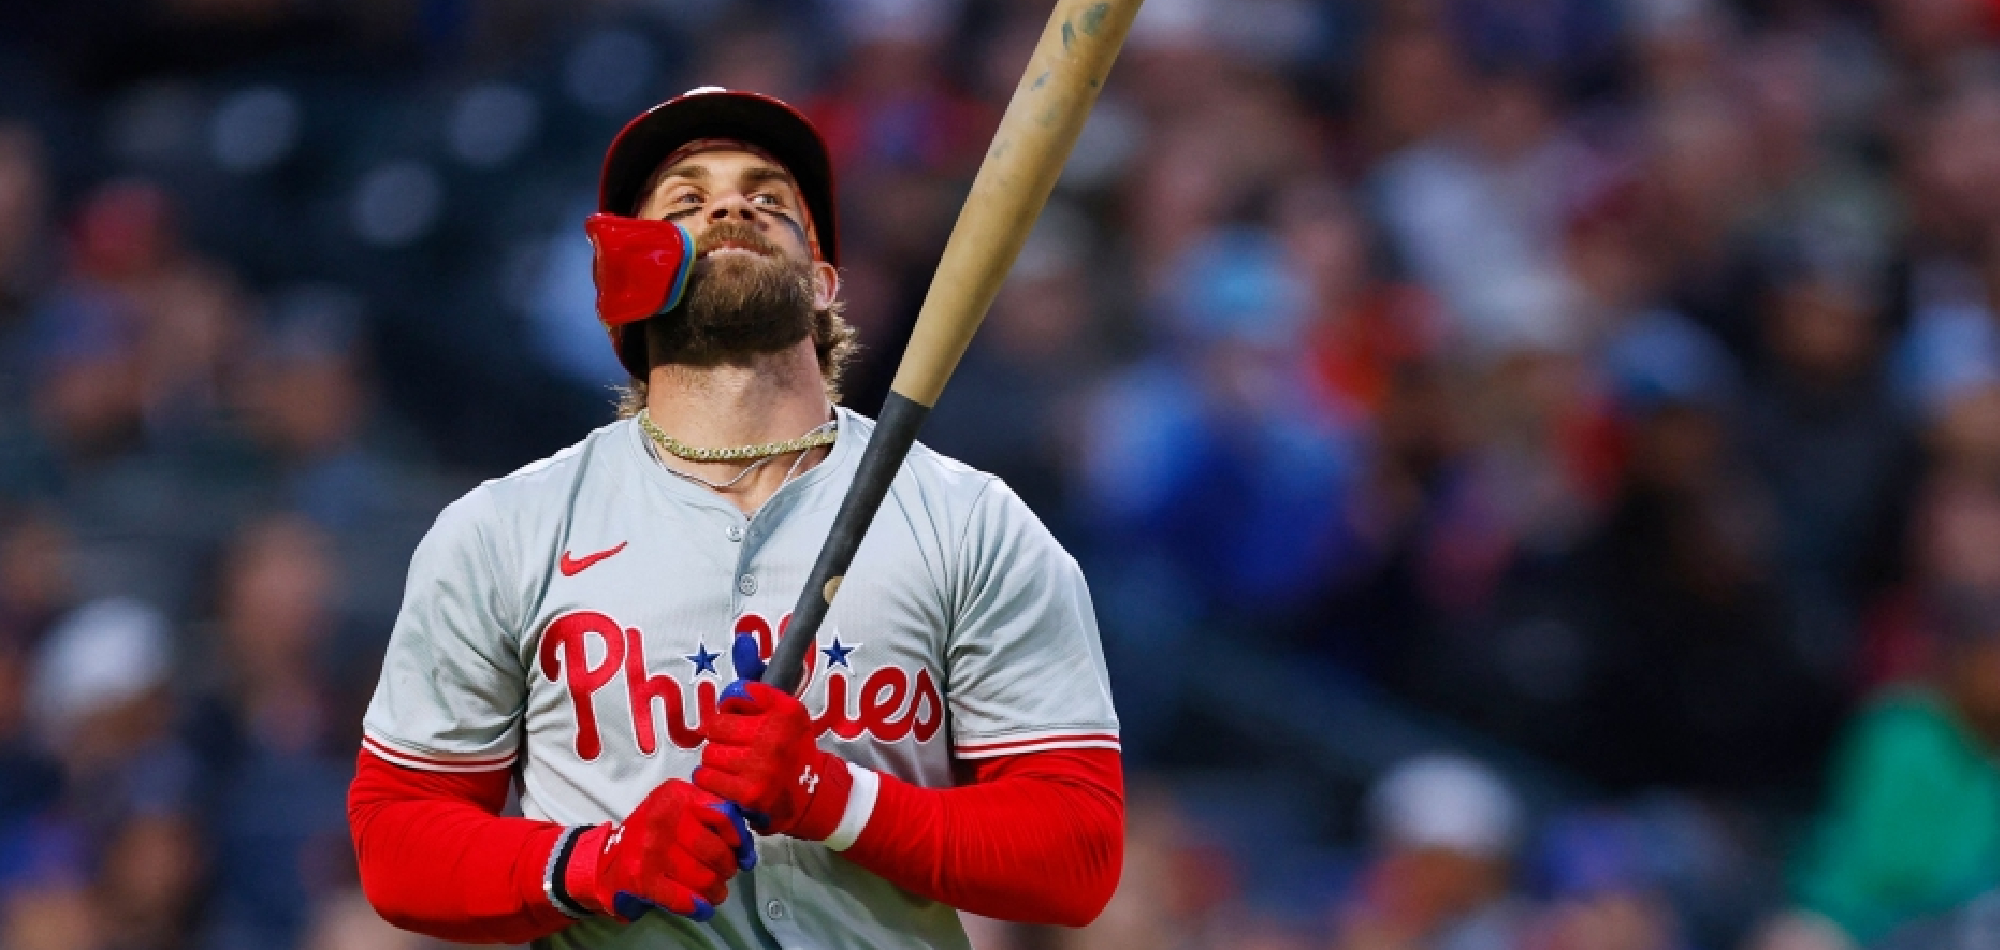 Bryce Harper scratched from Phillies